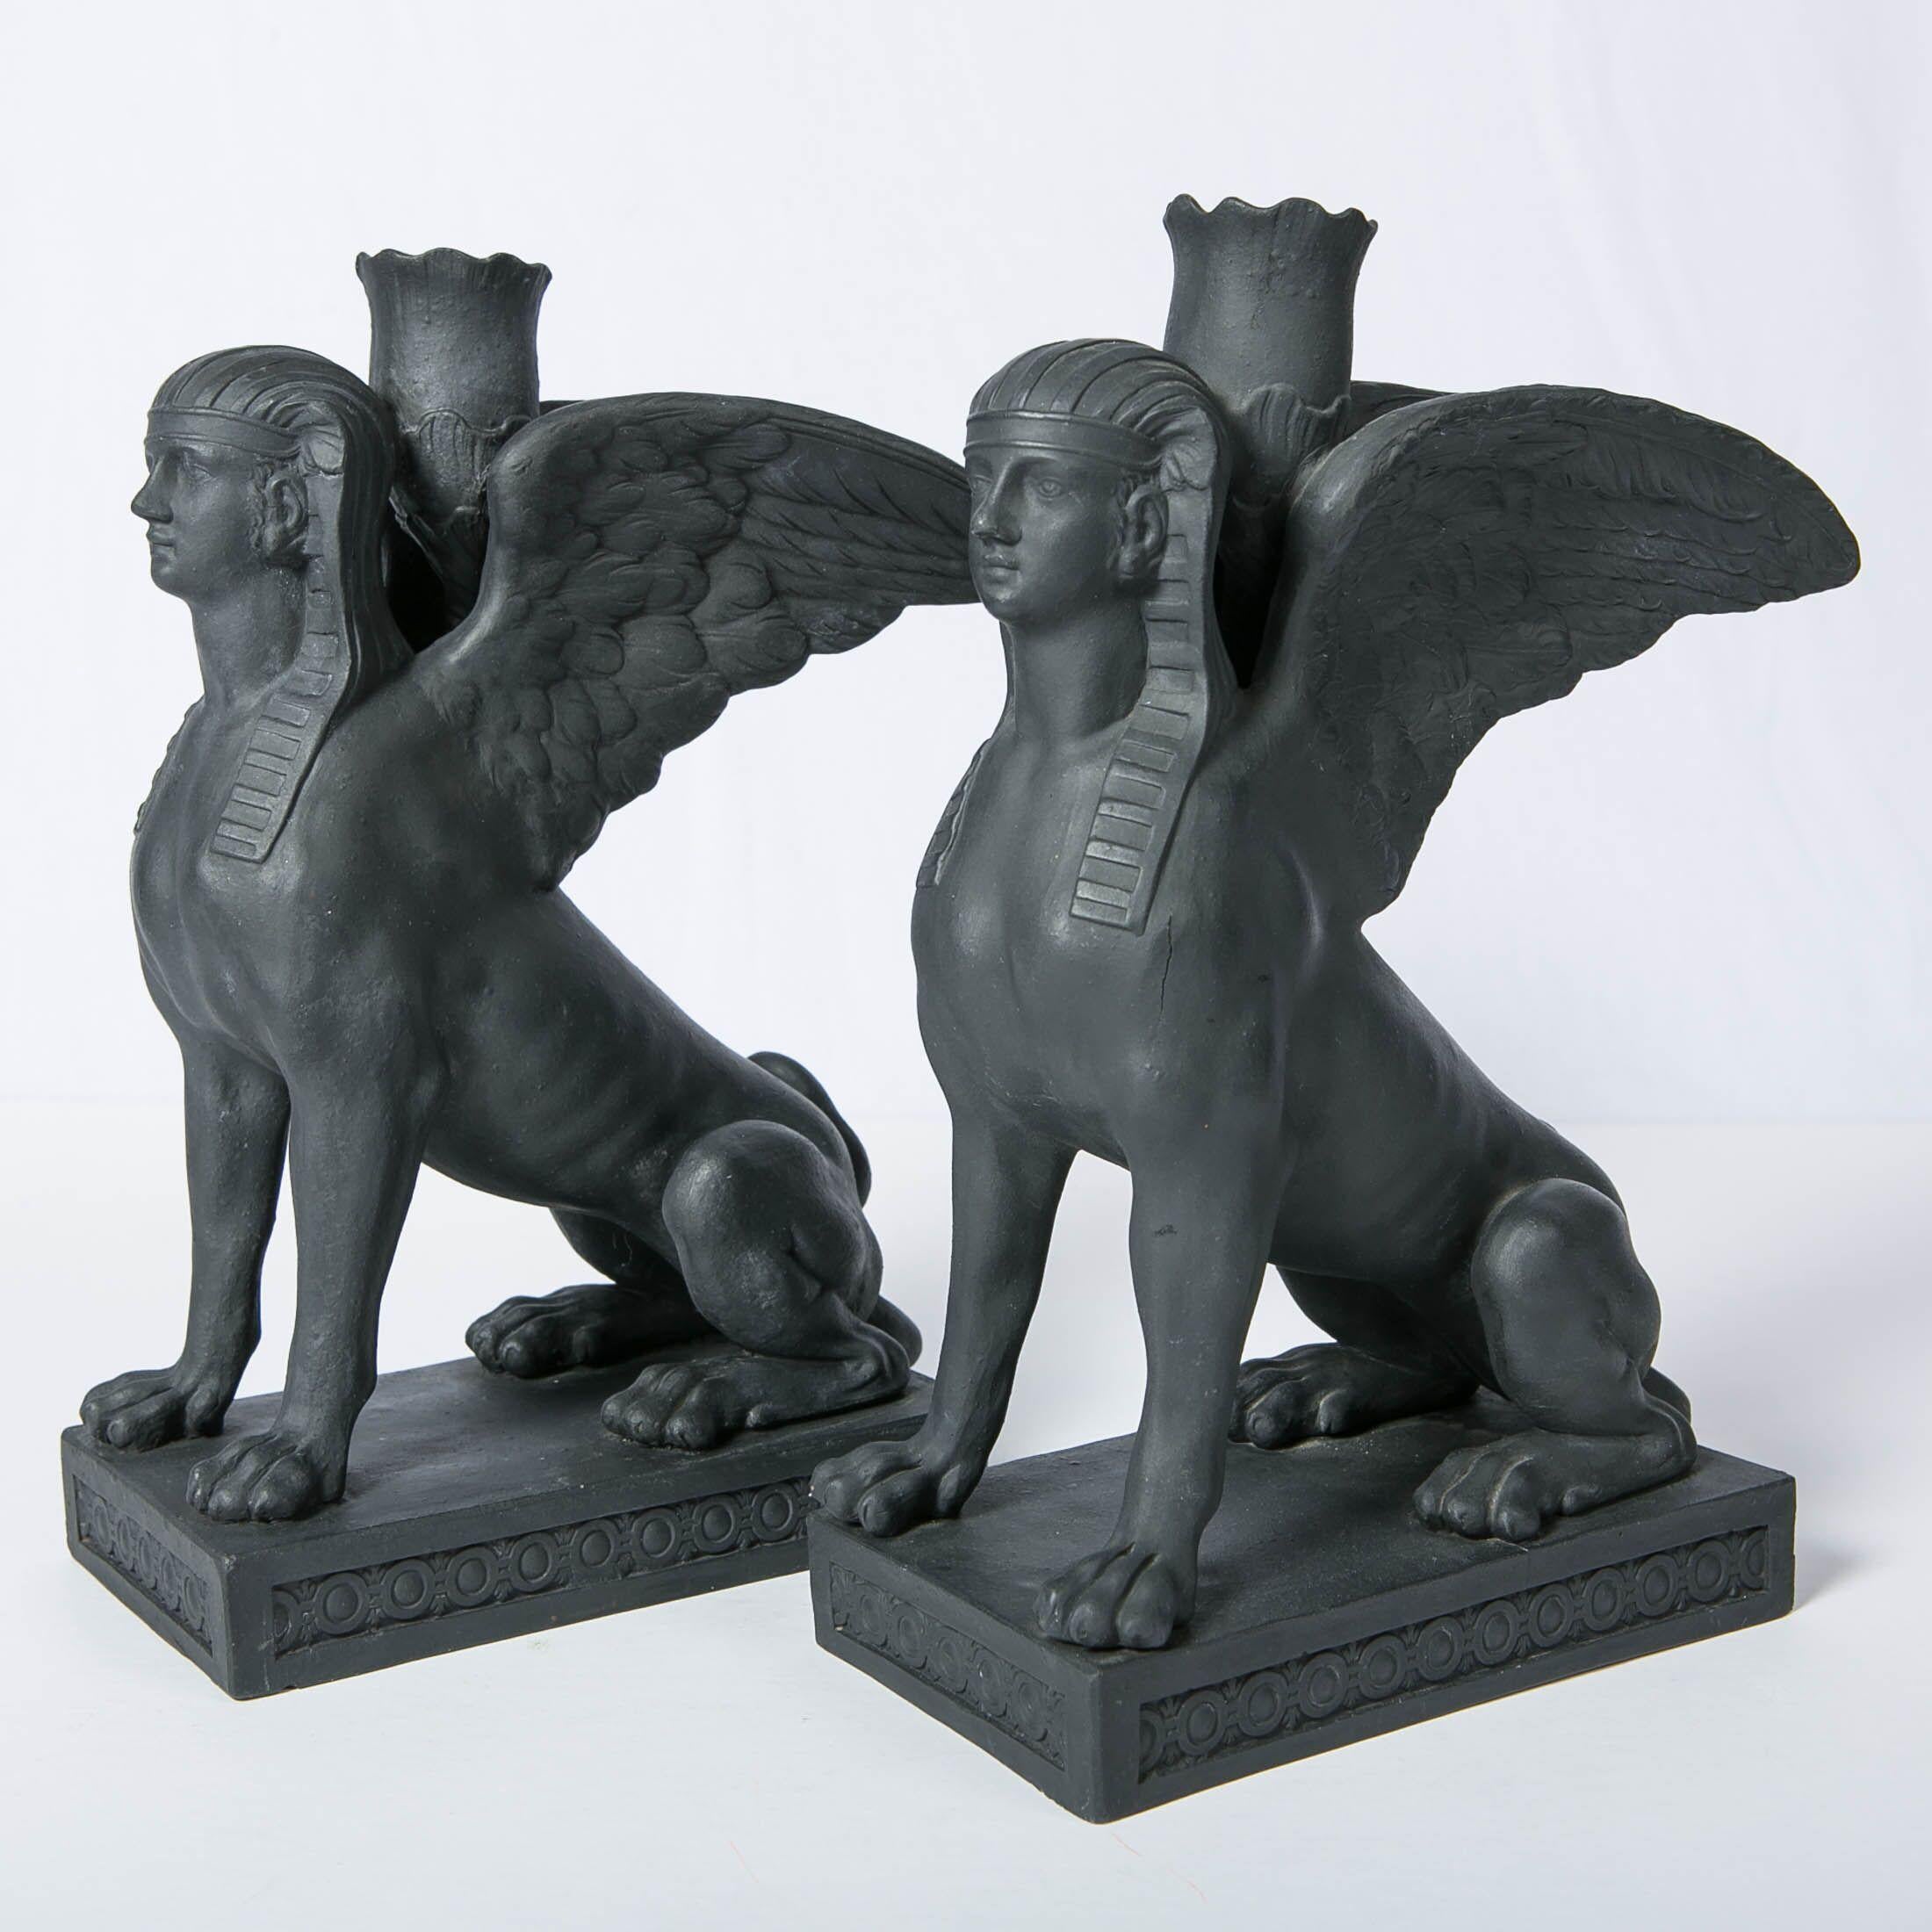 English Pair Wedgwood Egyptian Revival Black Basalt Sphinxes Made 18th Century, England For Sale